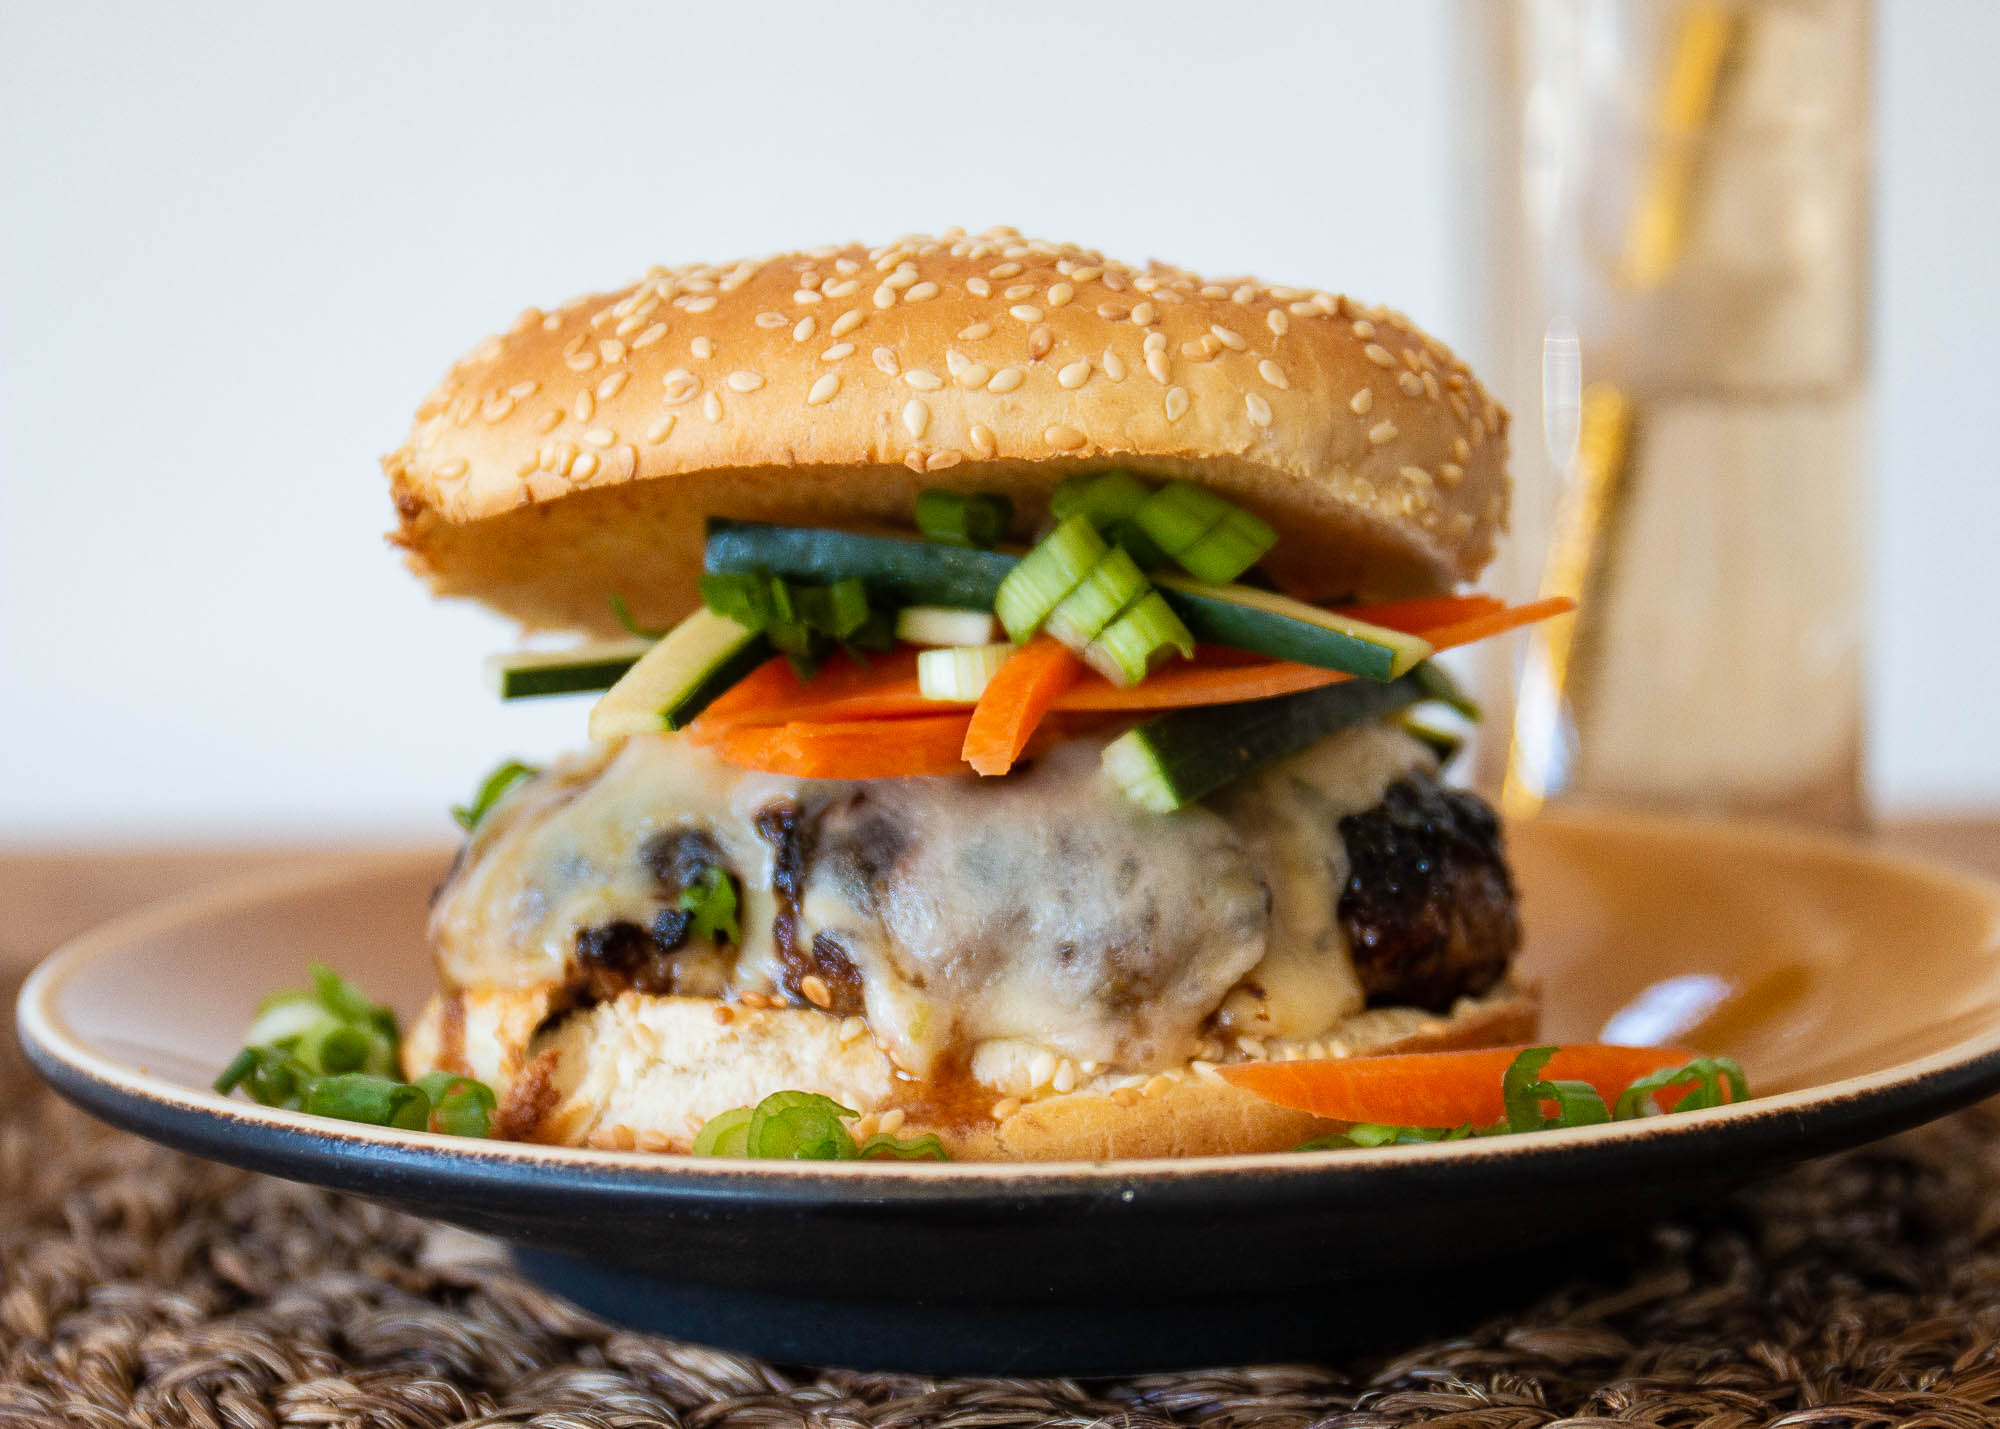 Asian Barbecue Burgers